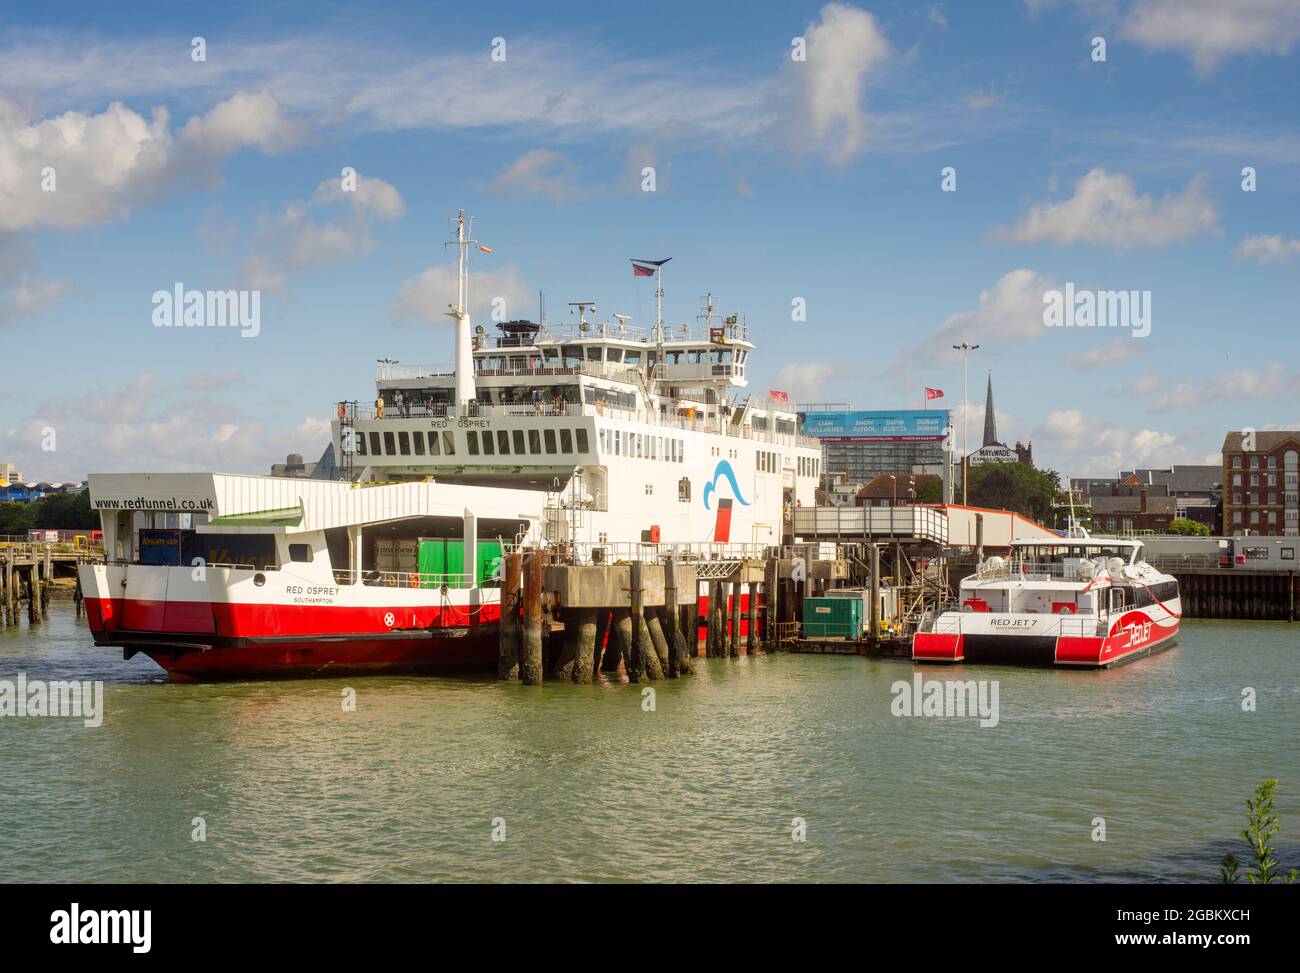 Red Funnel Isle of Wight ferry Red Osprey and Red Jet 7 fast catamaran alongside T1 terminal at Southampton Town Quay. Stock Photo